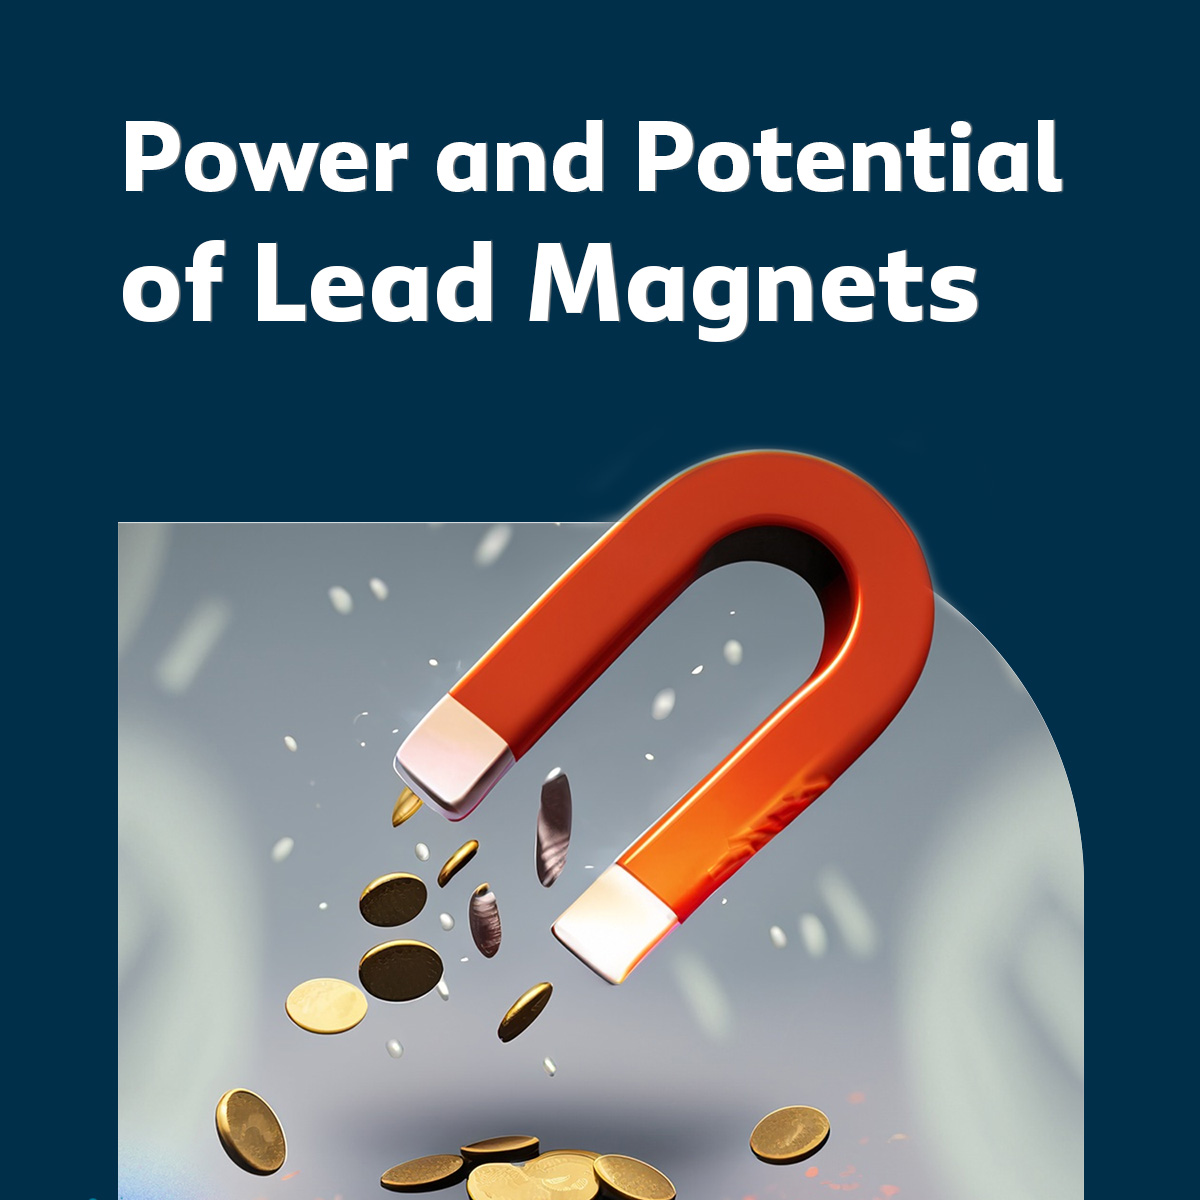 Power and Potential of Lead Magnets